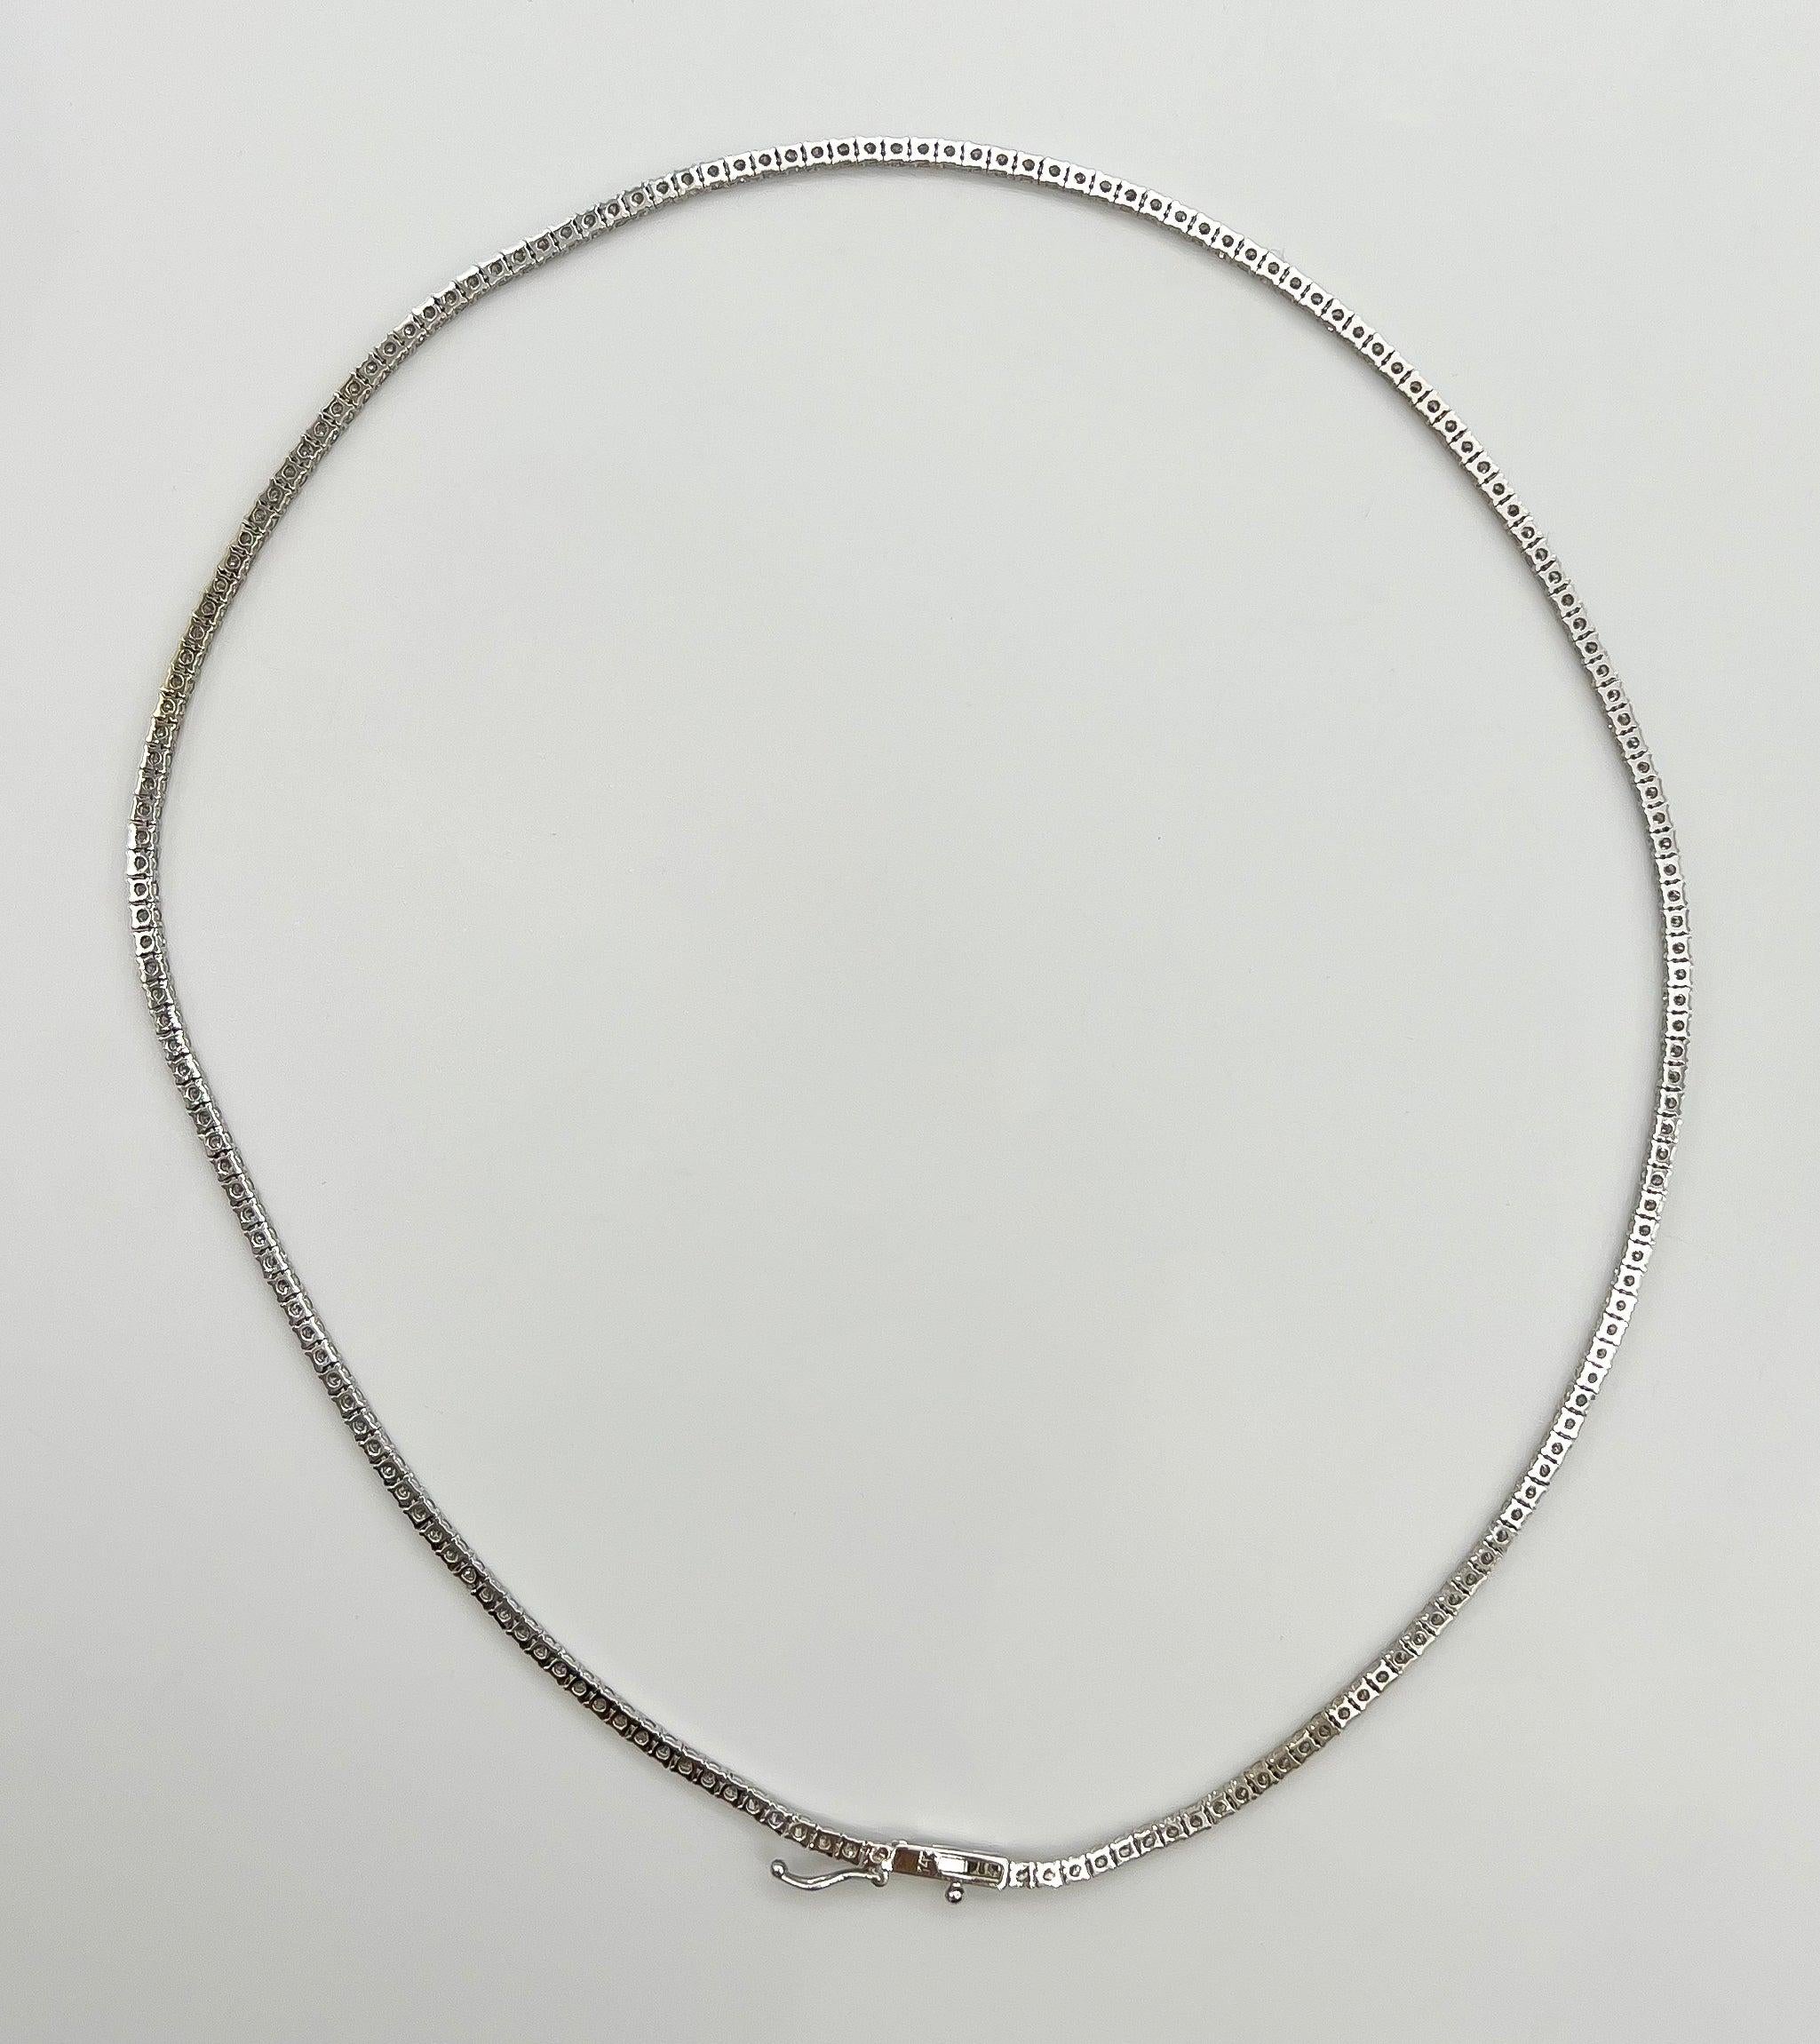 4.75 Carat Diamond Tennis Necklace with Round Diamonds in White Gold Chain In New Condition For Sale In New York, NY